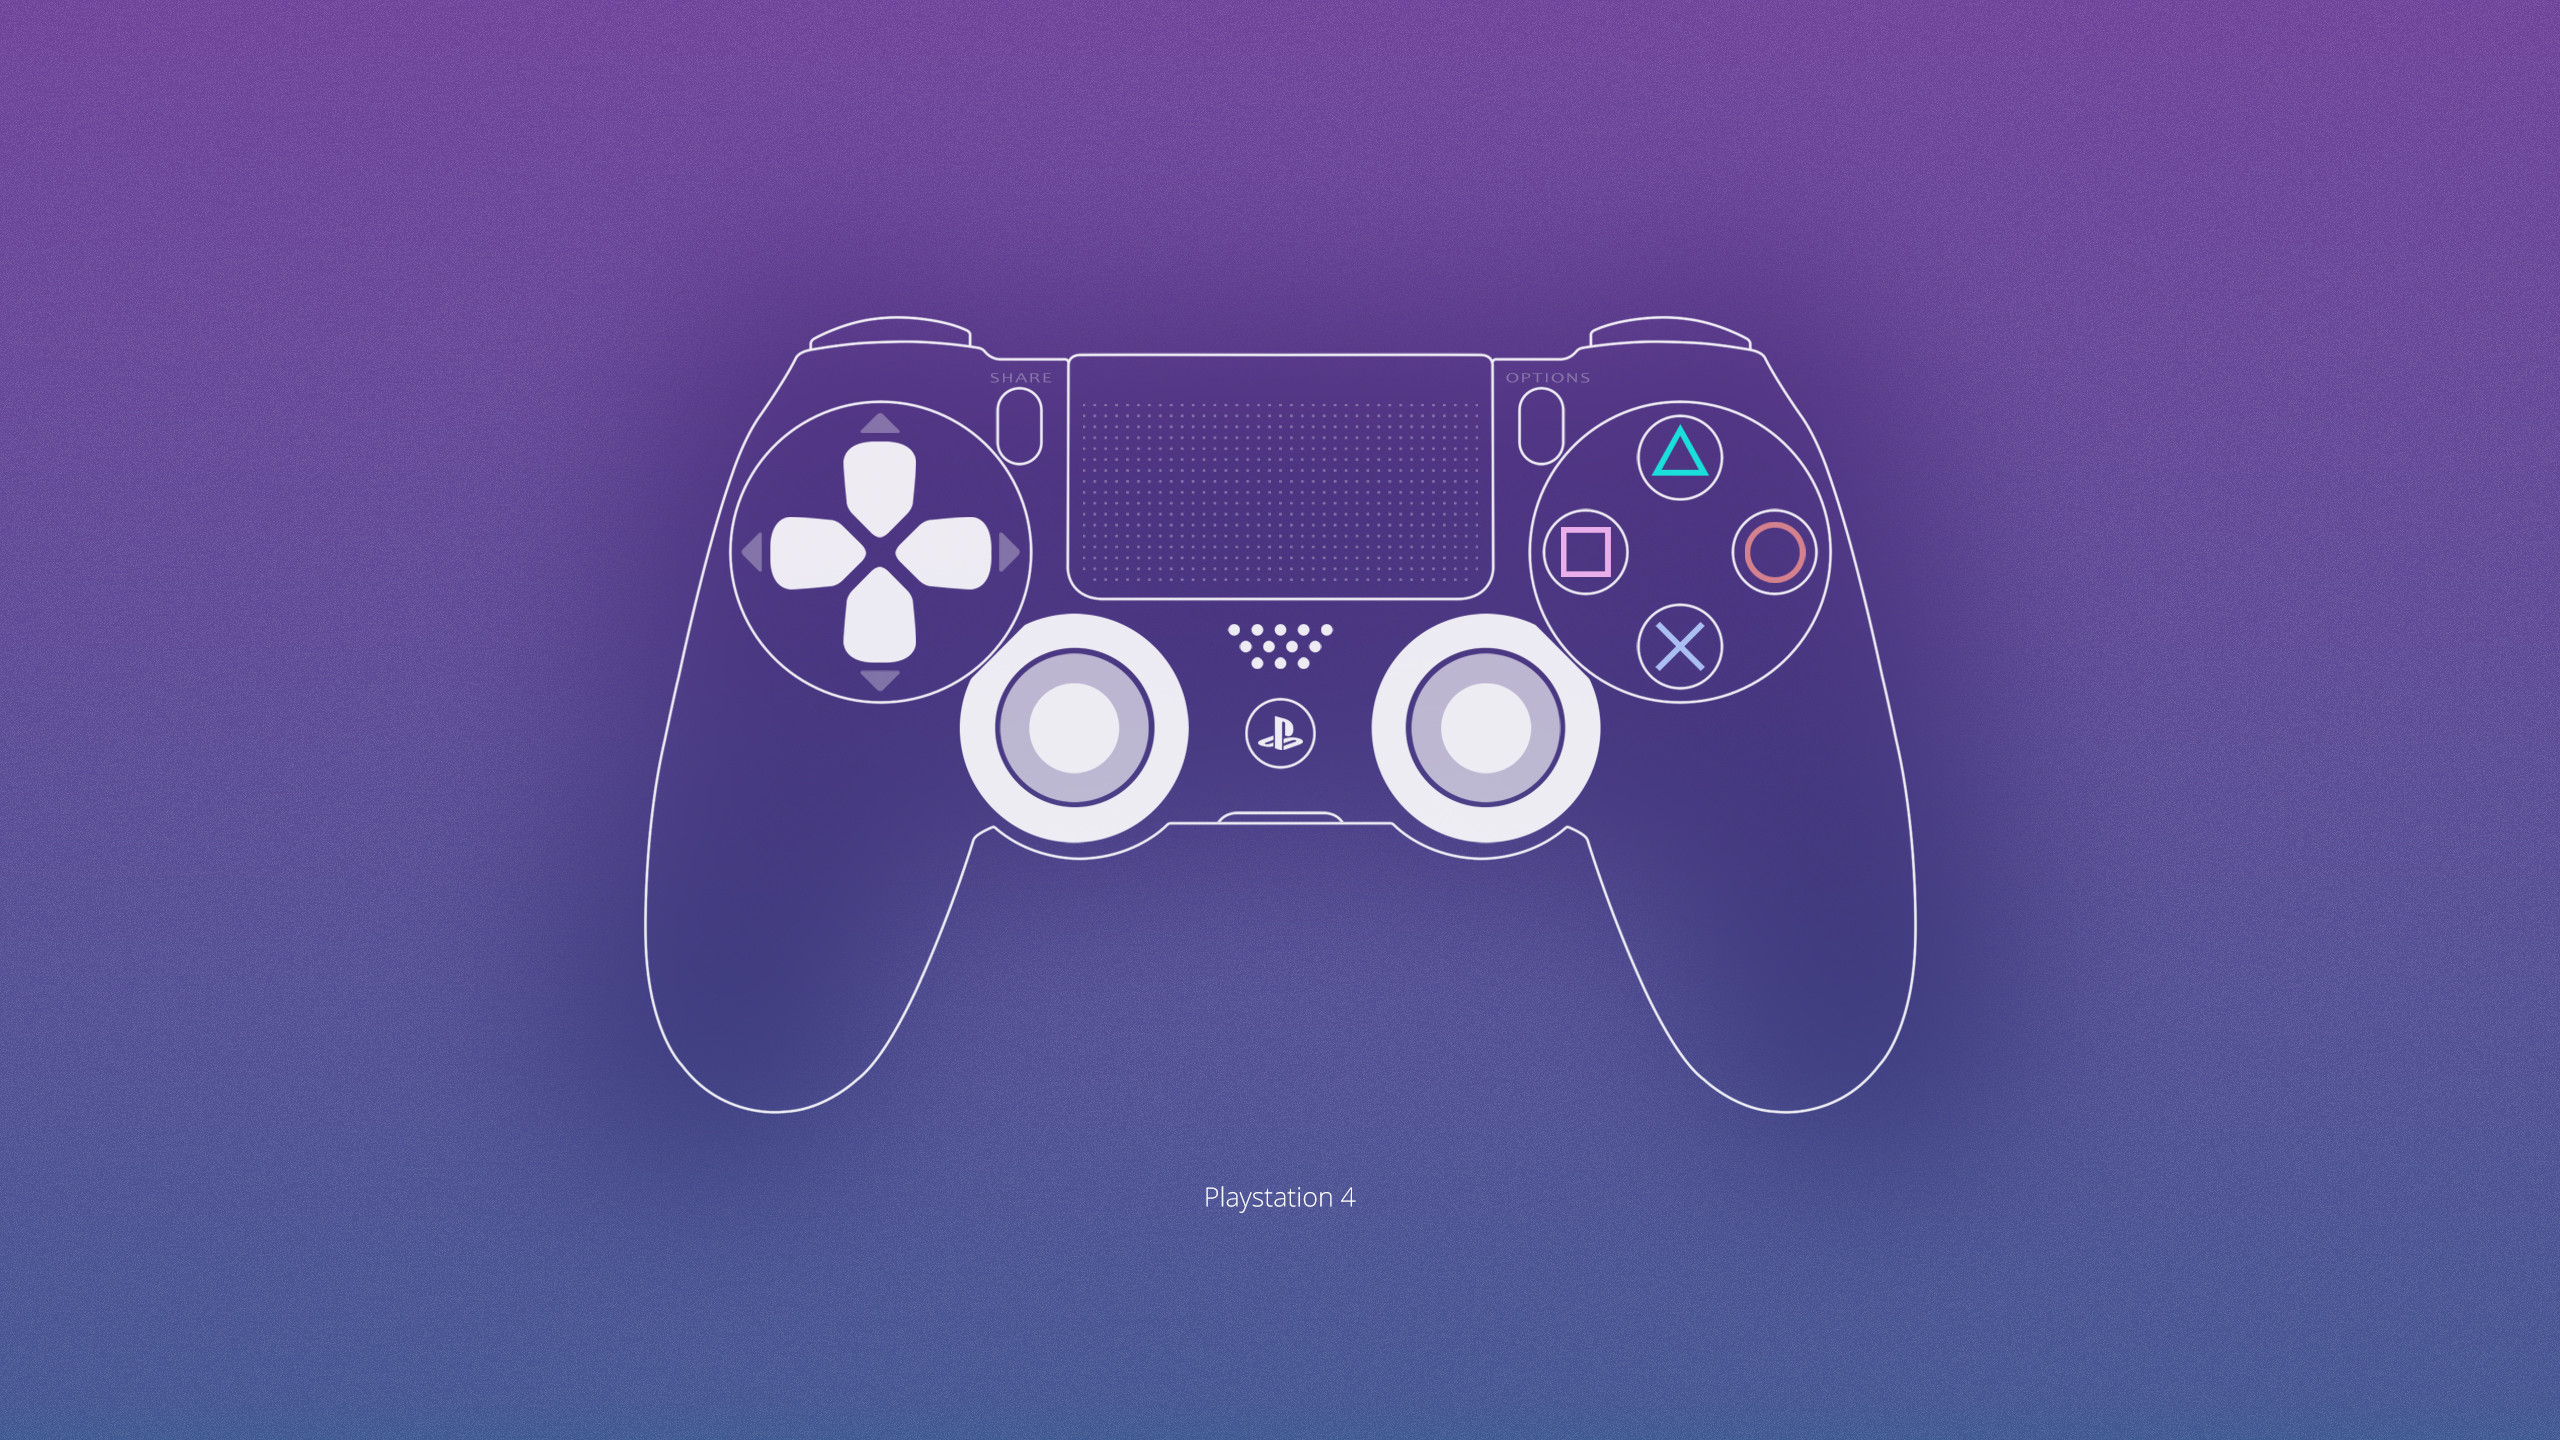 2560x1440 Playstation 4 Wallpaper by ljdesigner Playstation 4 Wallpaper by ljdesigner